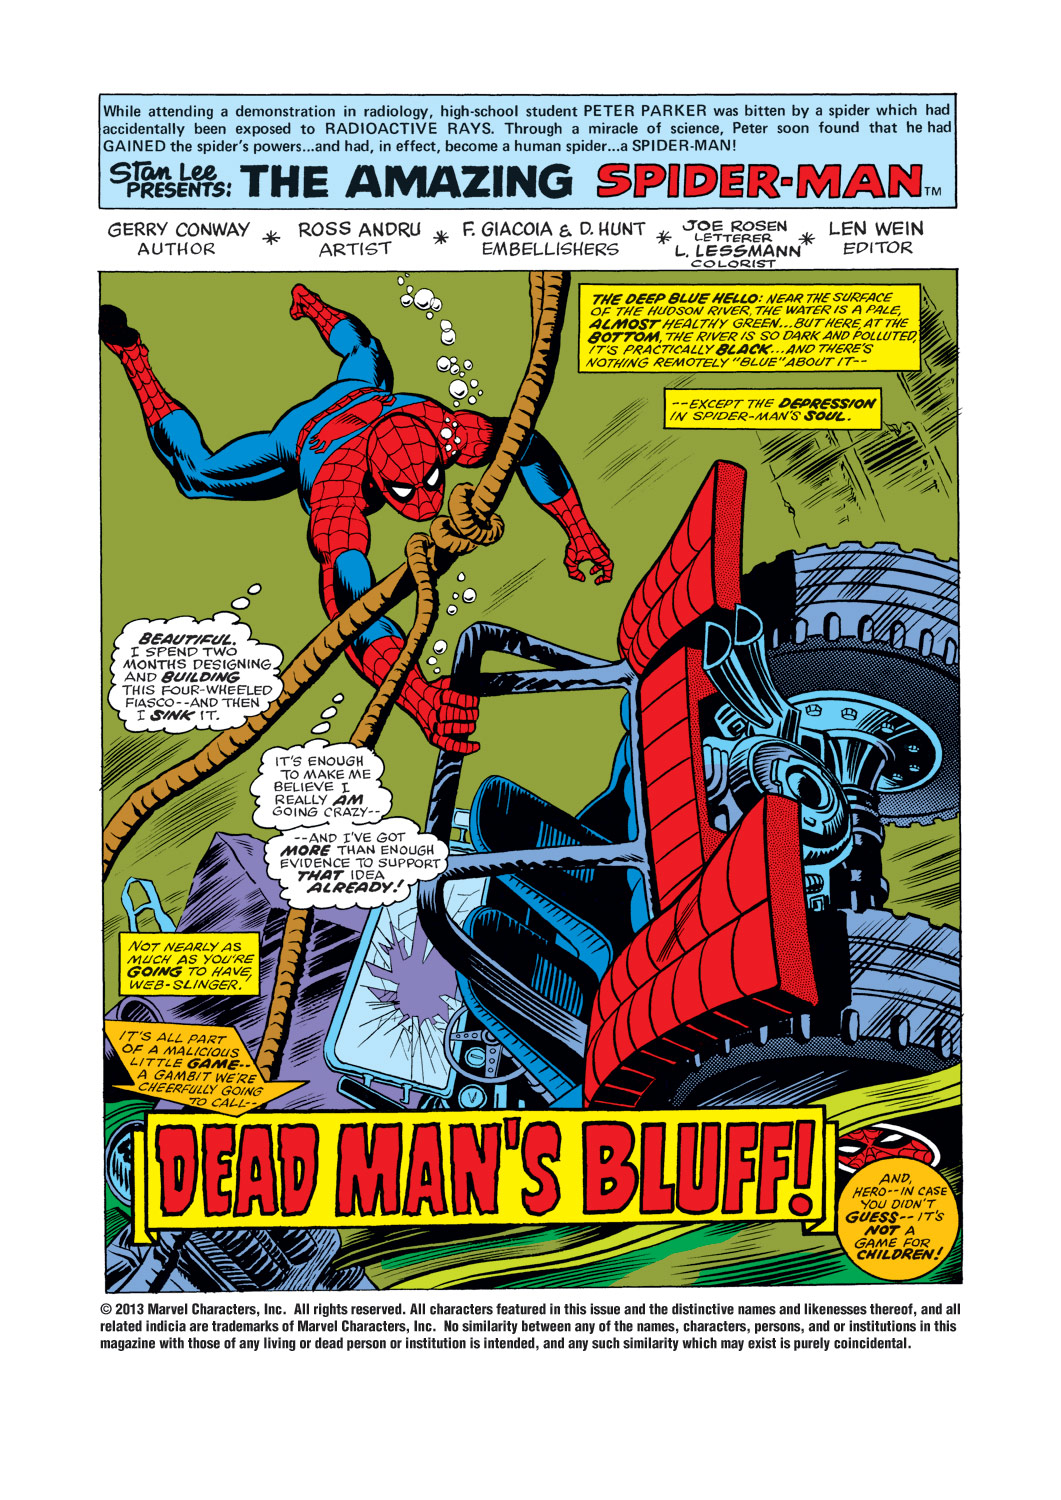 The Amazing Spider-Man (1963) 142 Page 1